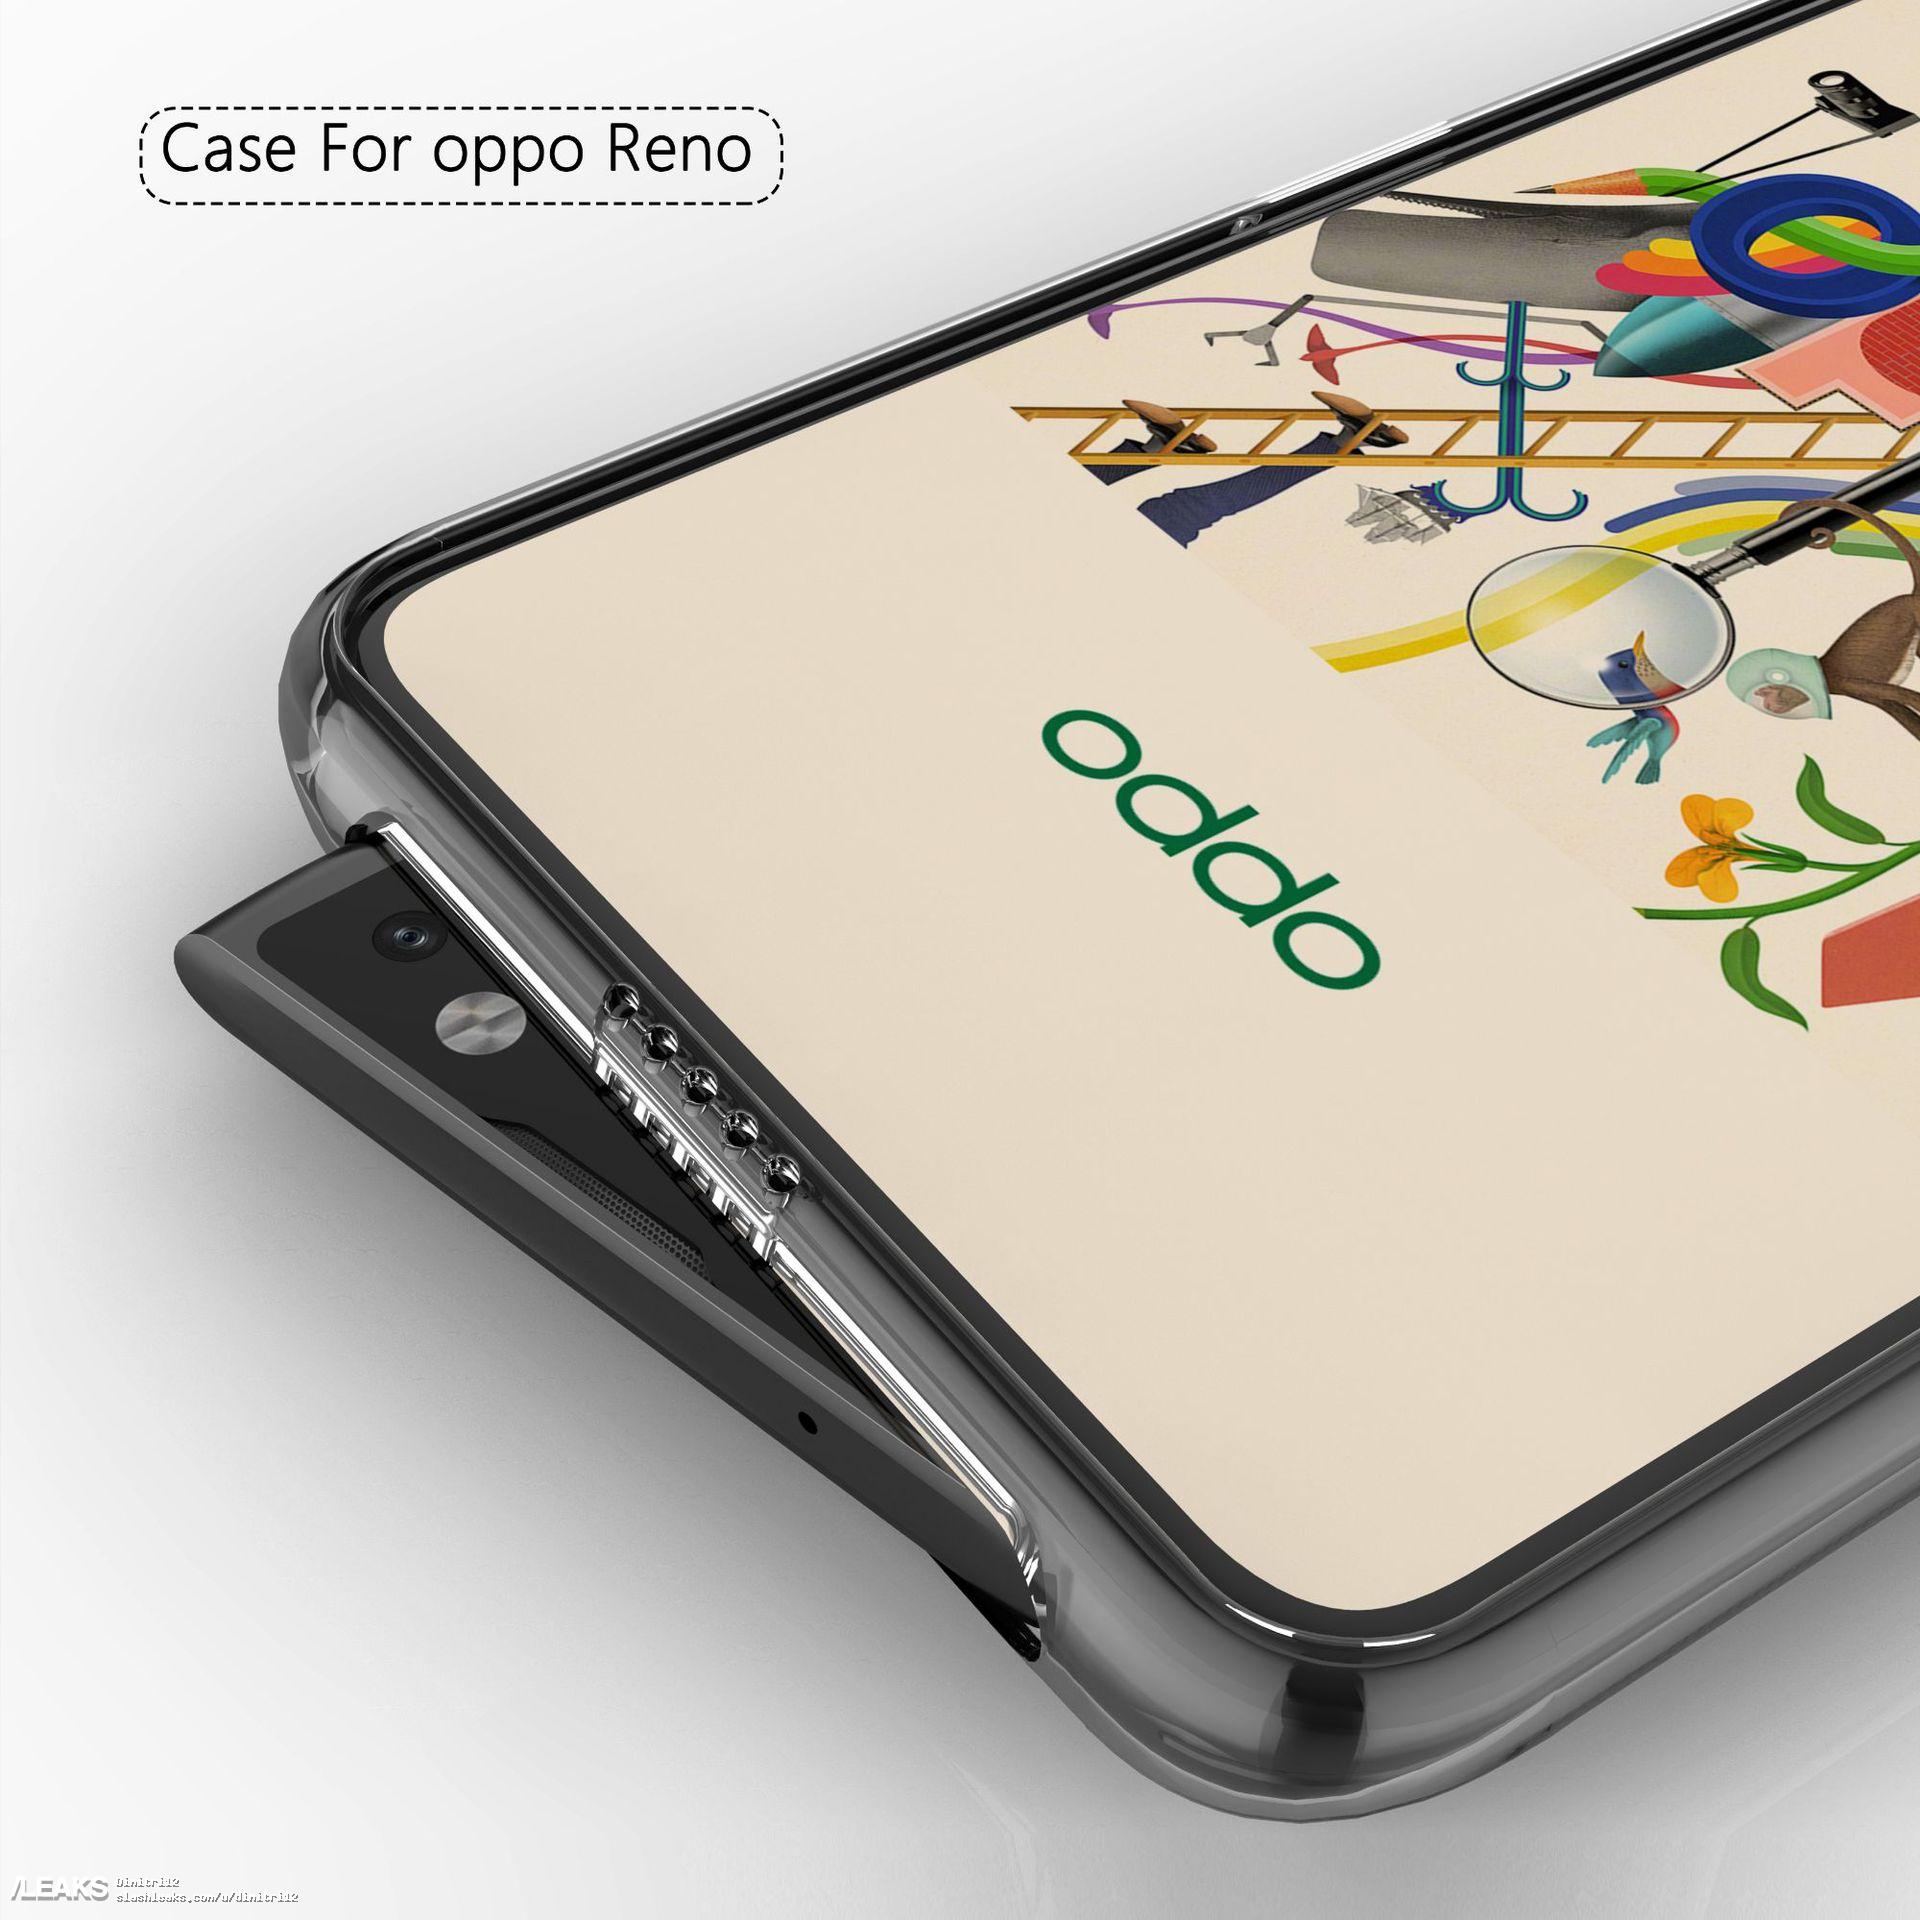 OPPO Reno full specifications (Snapdragon 710 edition) revealed 